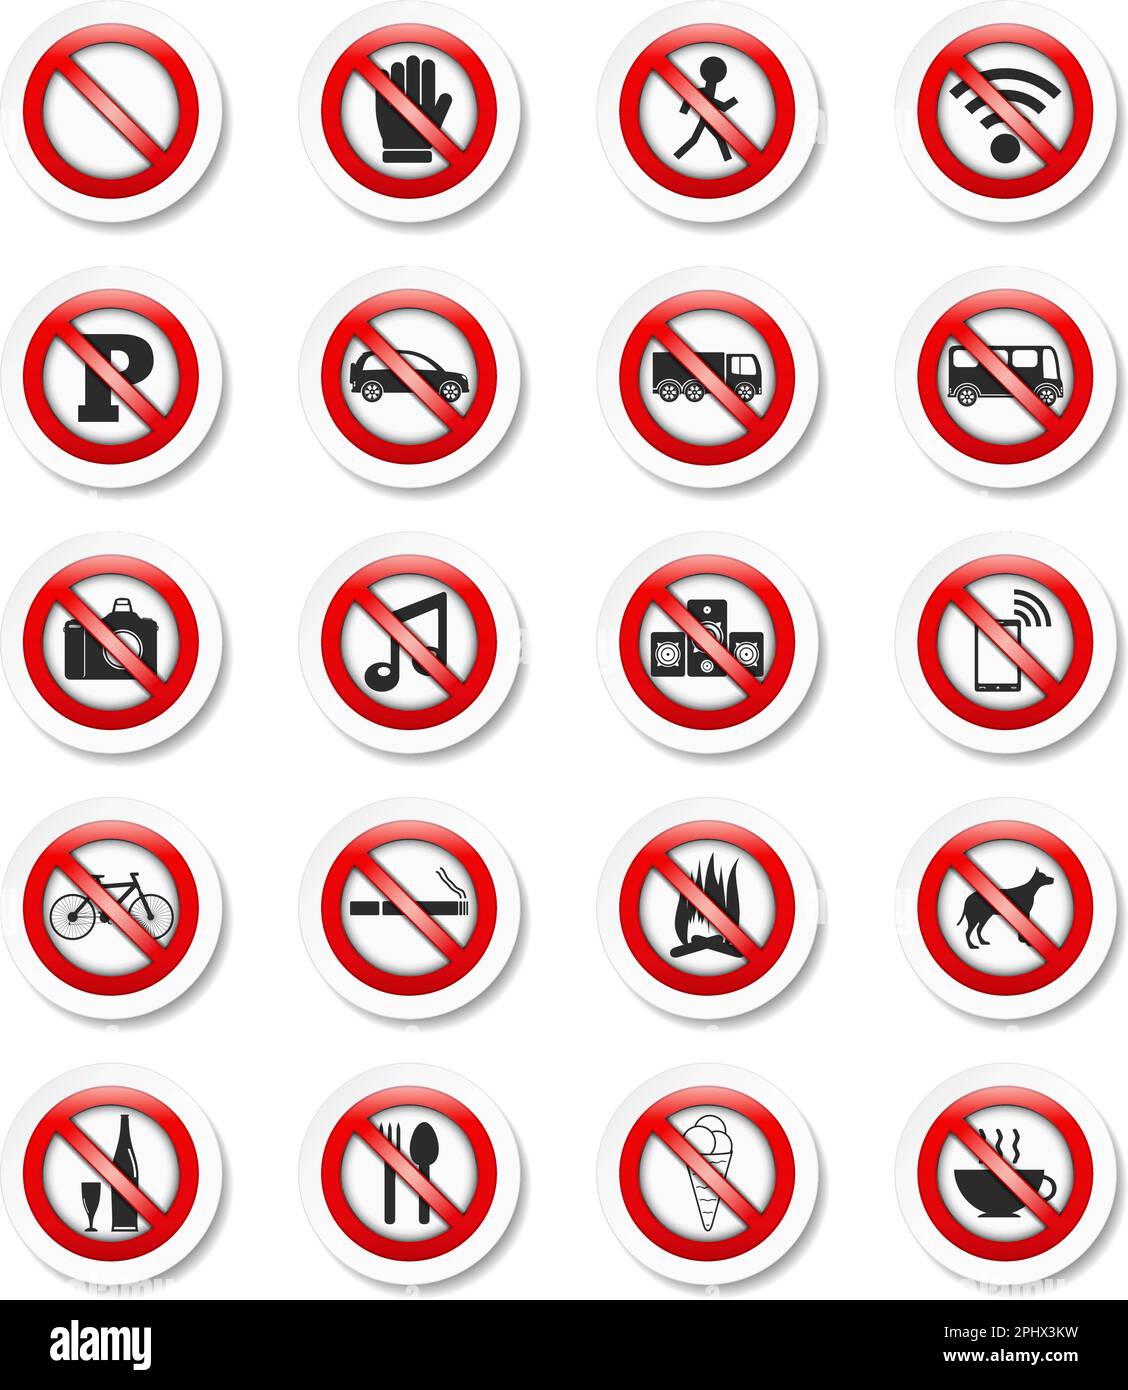 Set of stickers with prohibition signs, vector eps10 illustration Stock Vector